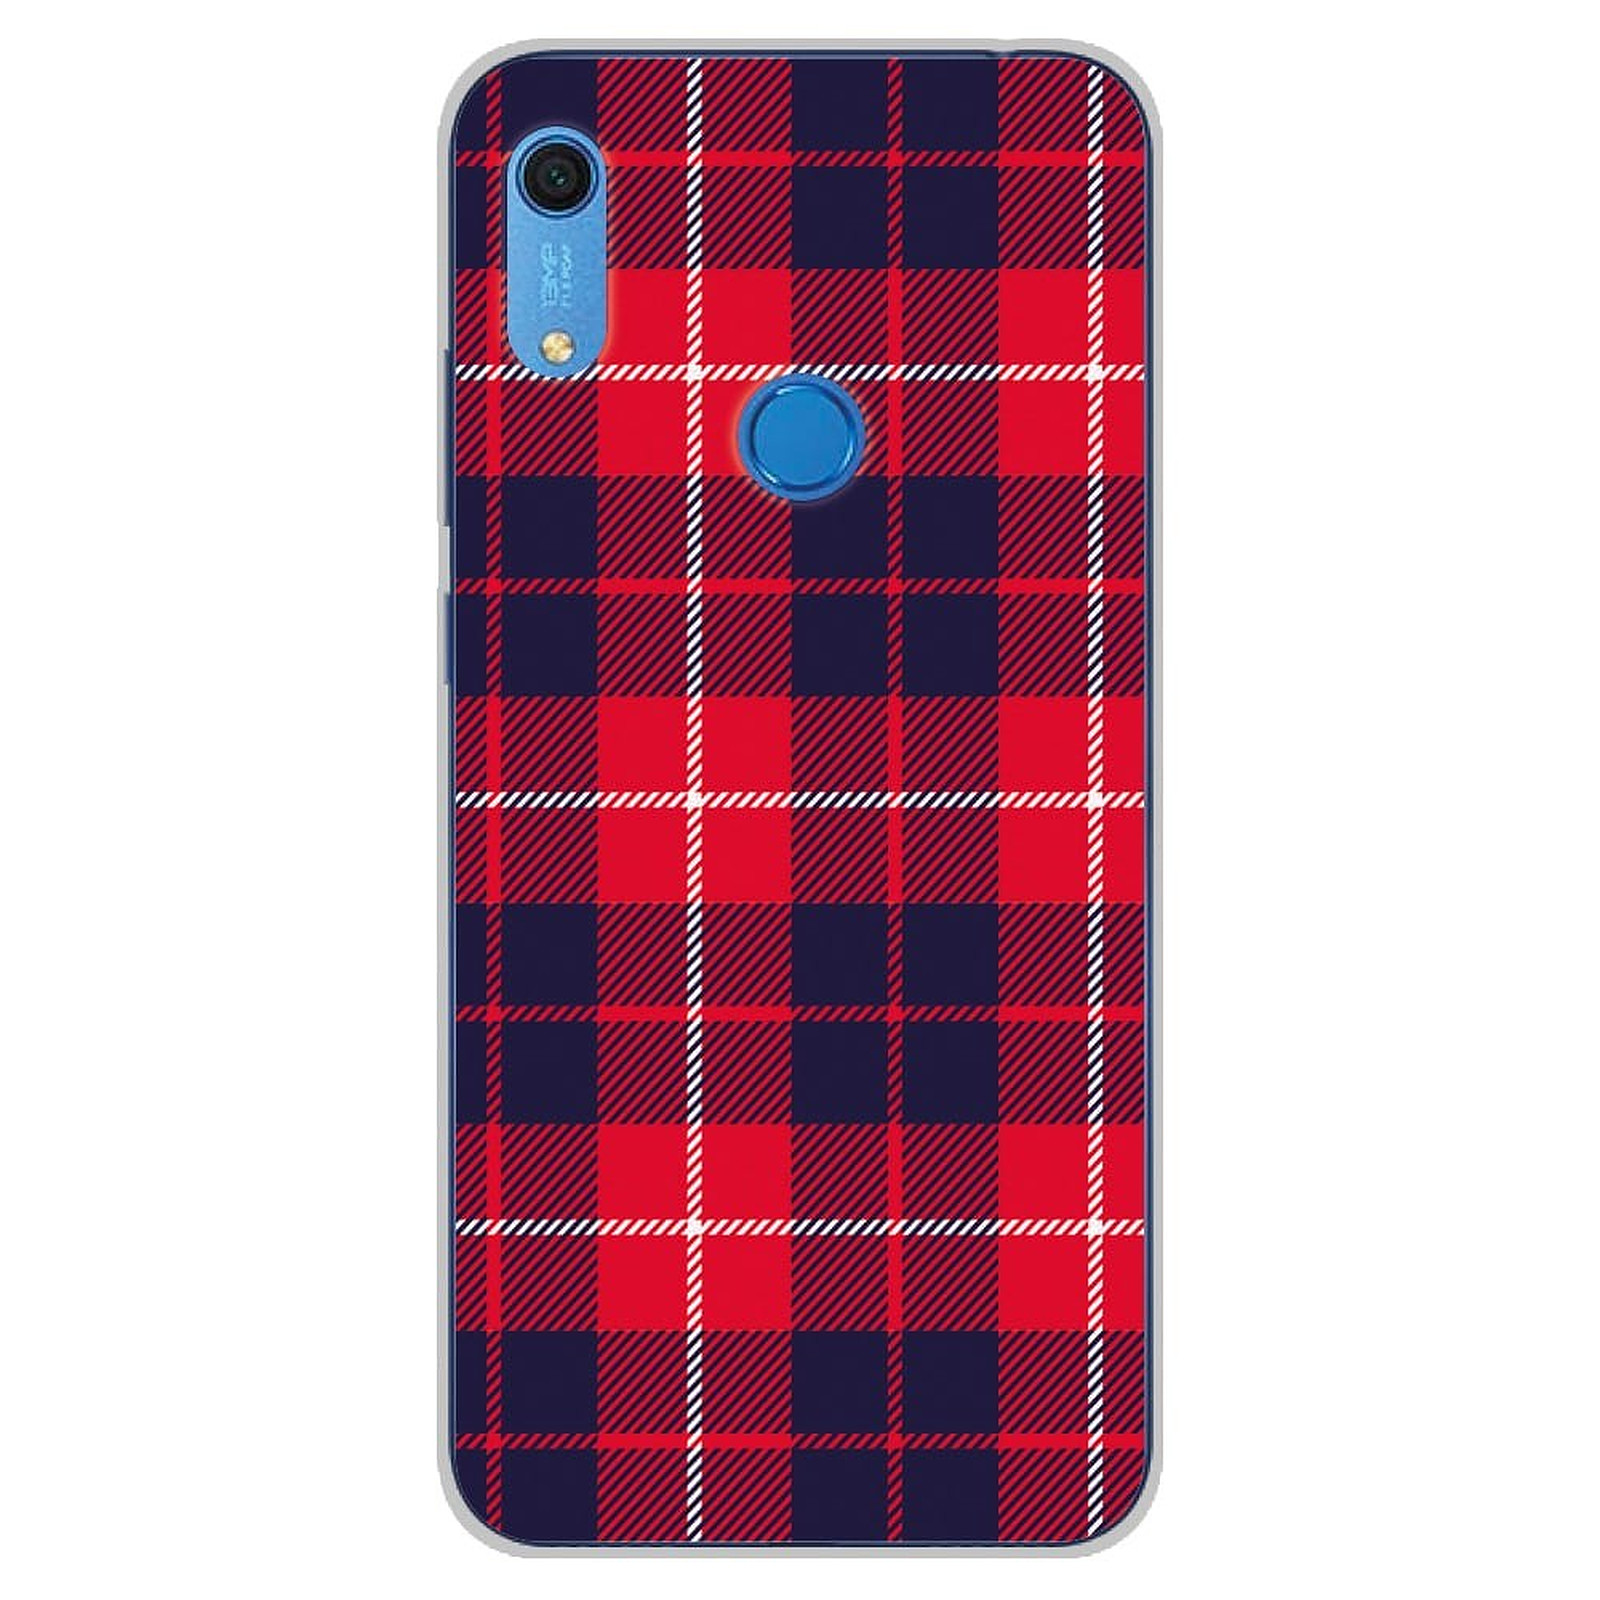 1001 Coques Coque silicone gel Huawei Y6S motif Tartan Rouge 2 - Coque telephone 1001Coques